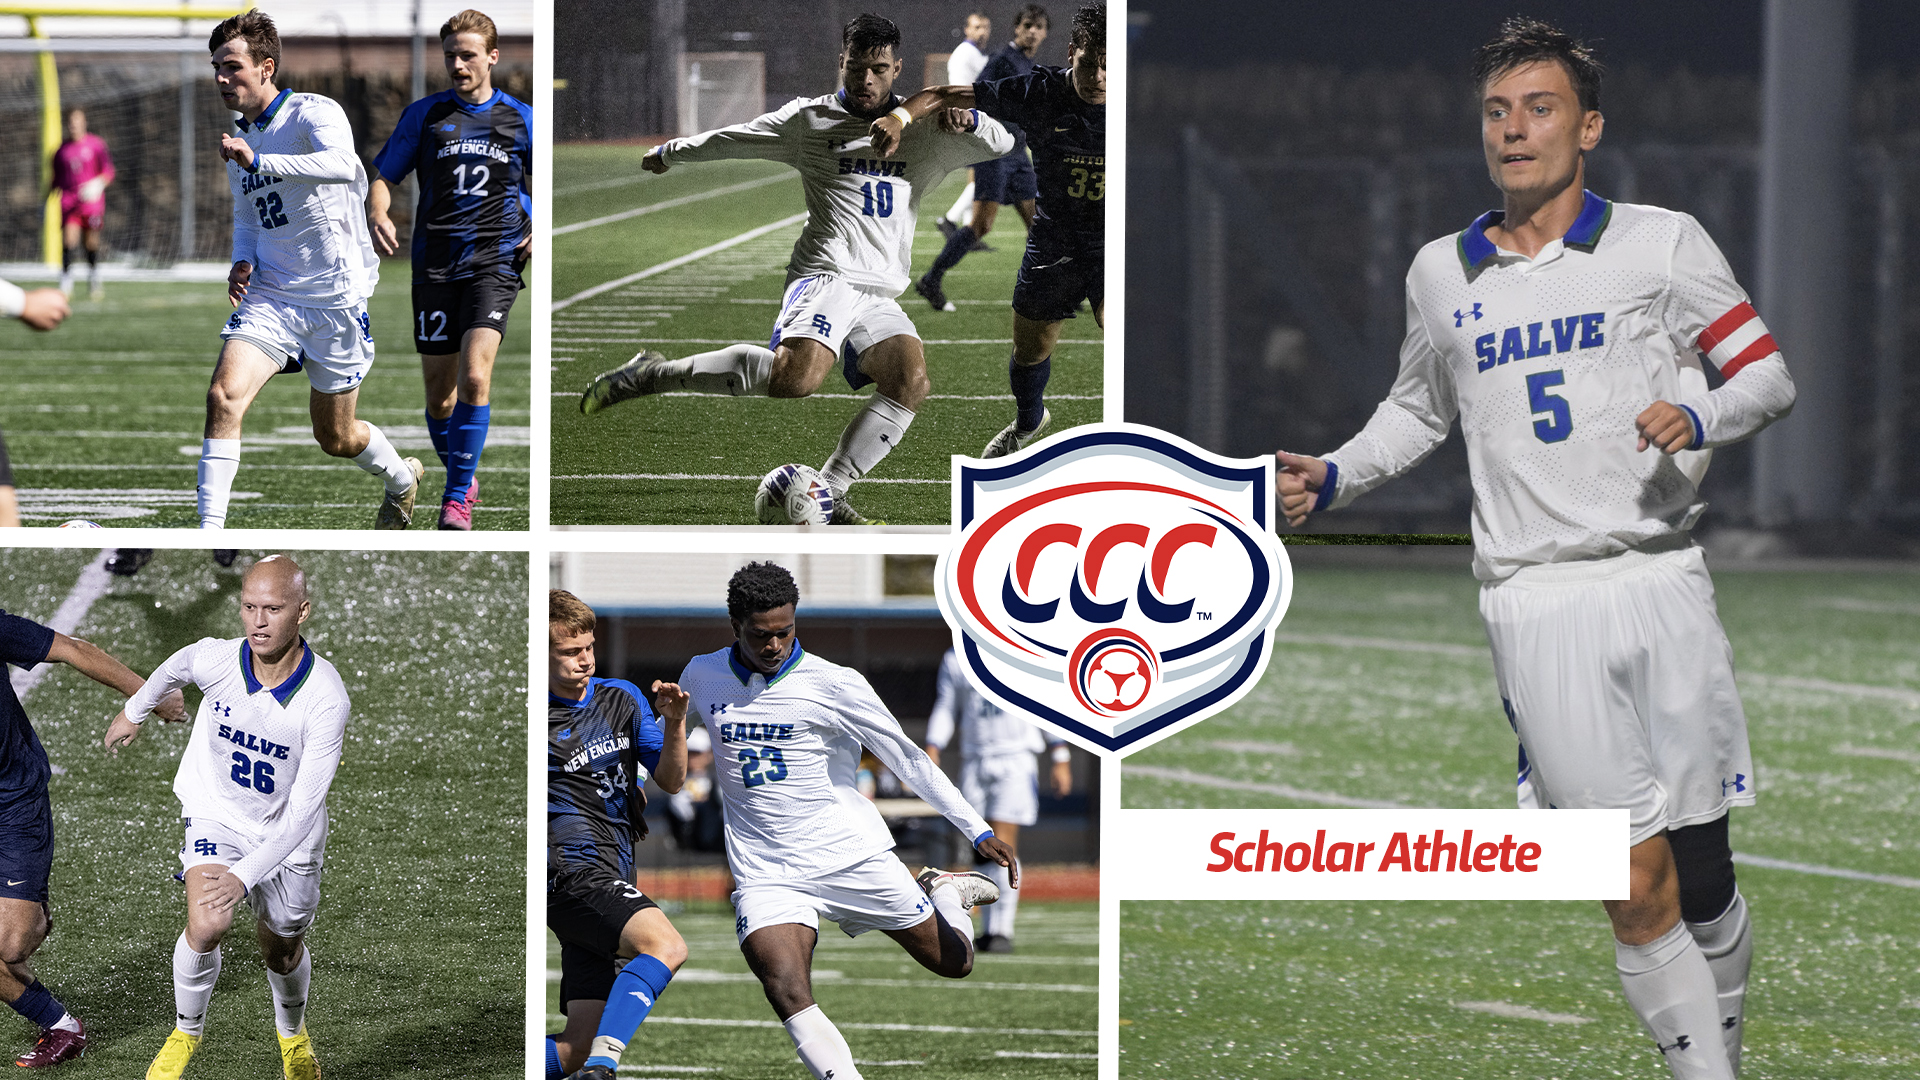 James Davies was named CCC Scholar Athlete while four others made an All-CCC team.